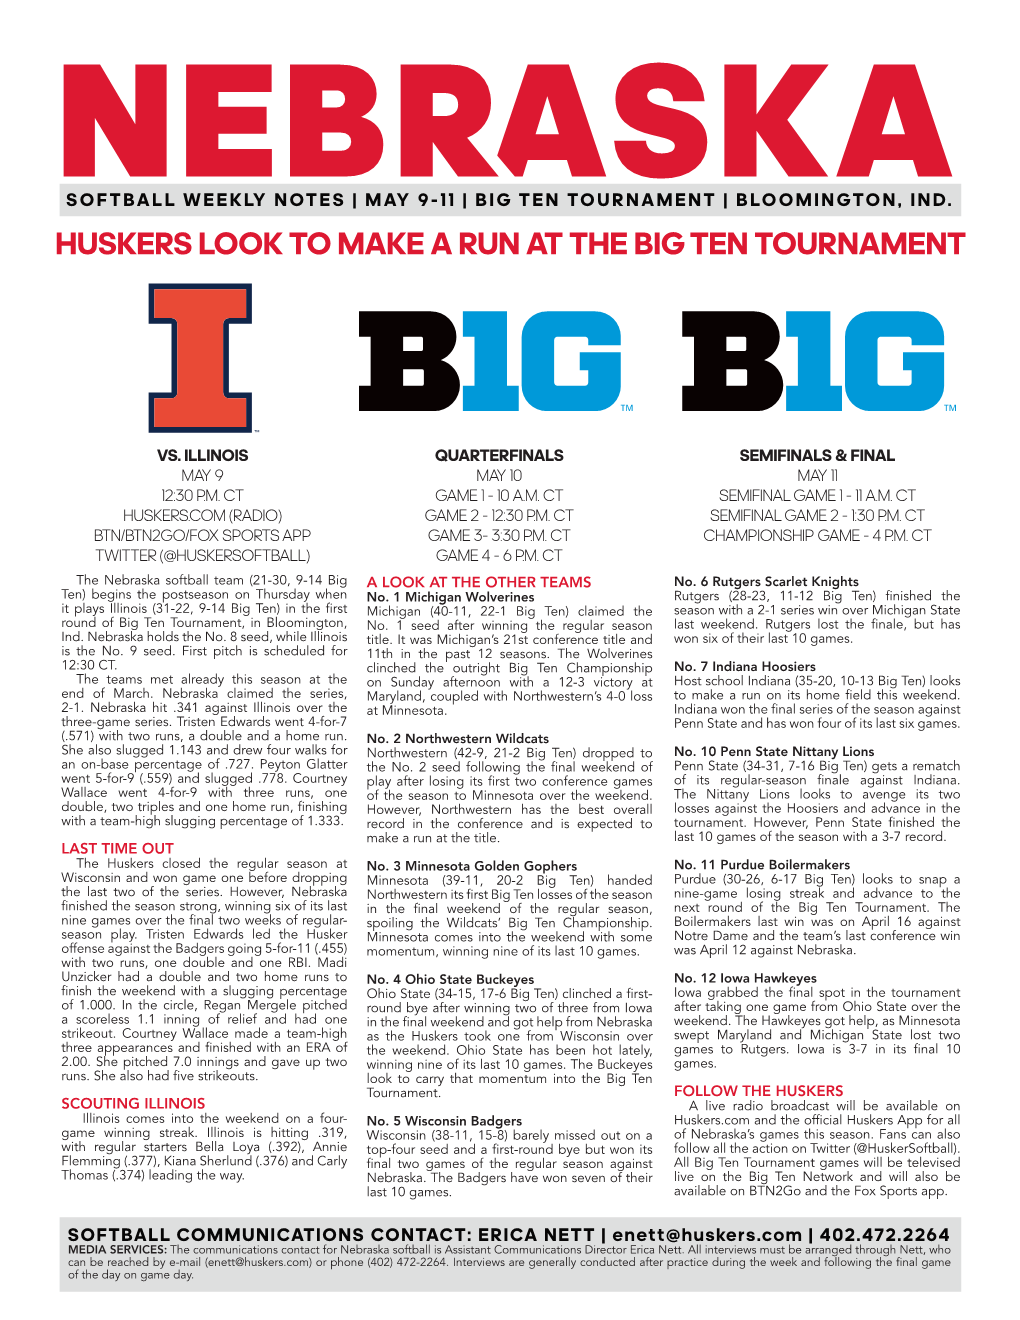 Huskers Look to Make a Run at the Big Ten Tournament